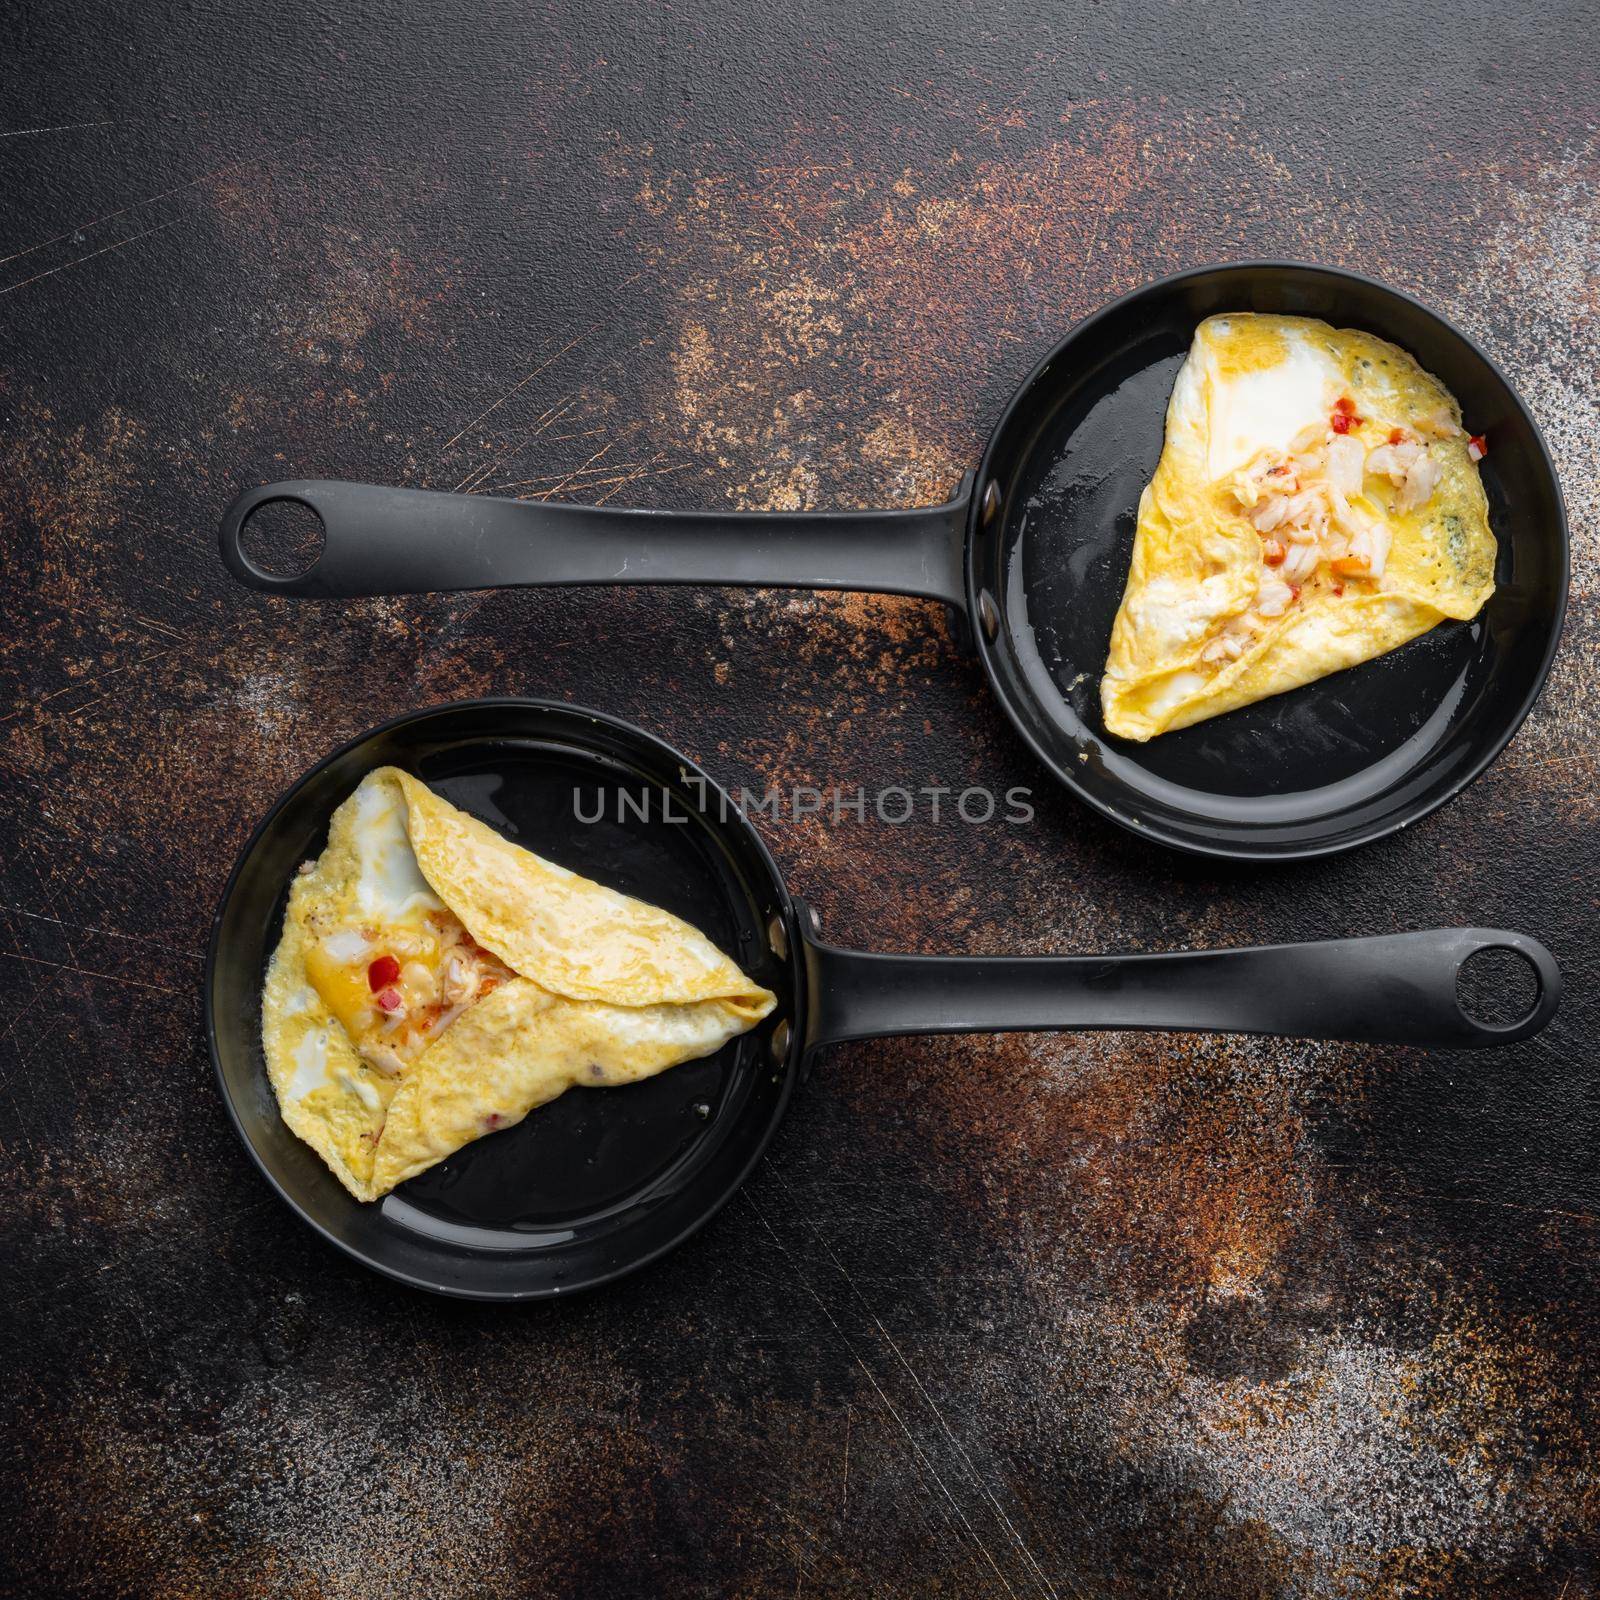 Chilli crab silky omlette, on frying iron pan, on old dark rustic background, top view flat lay